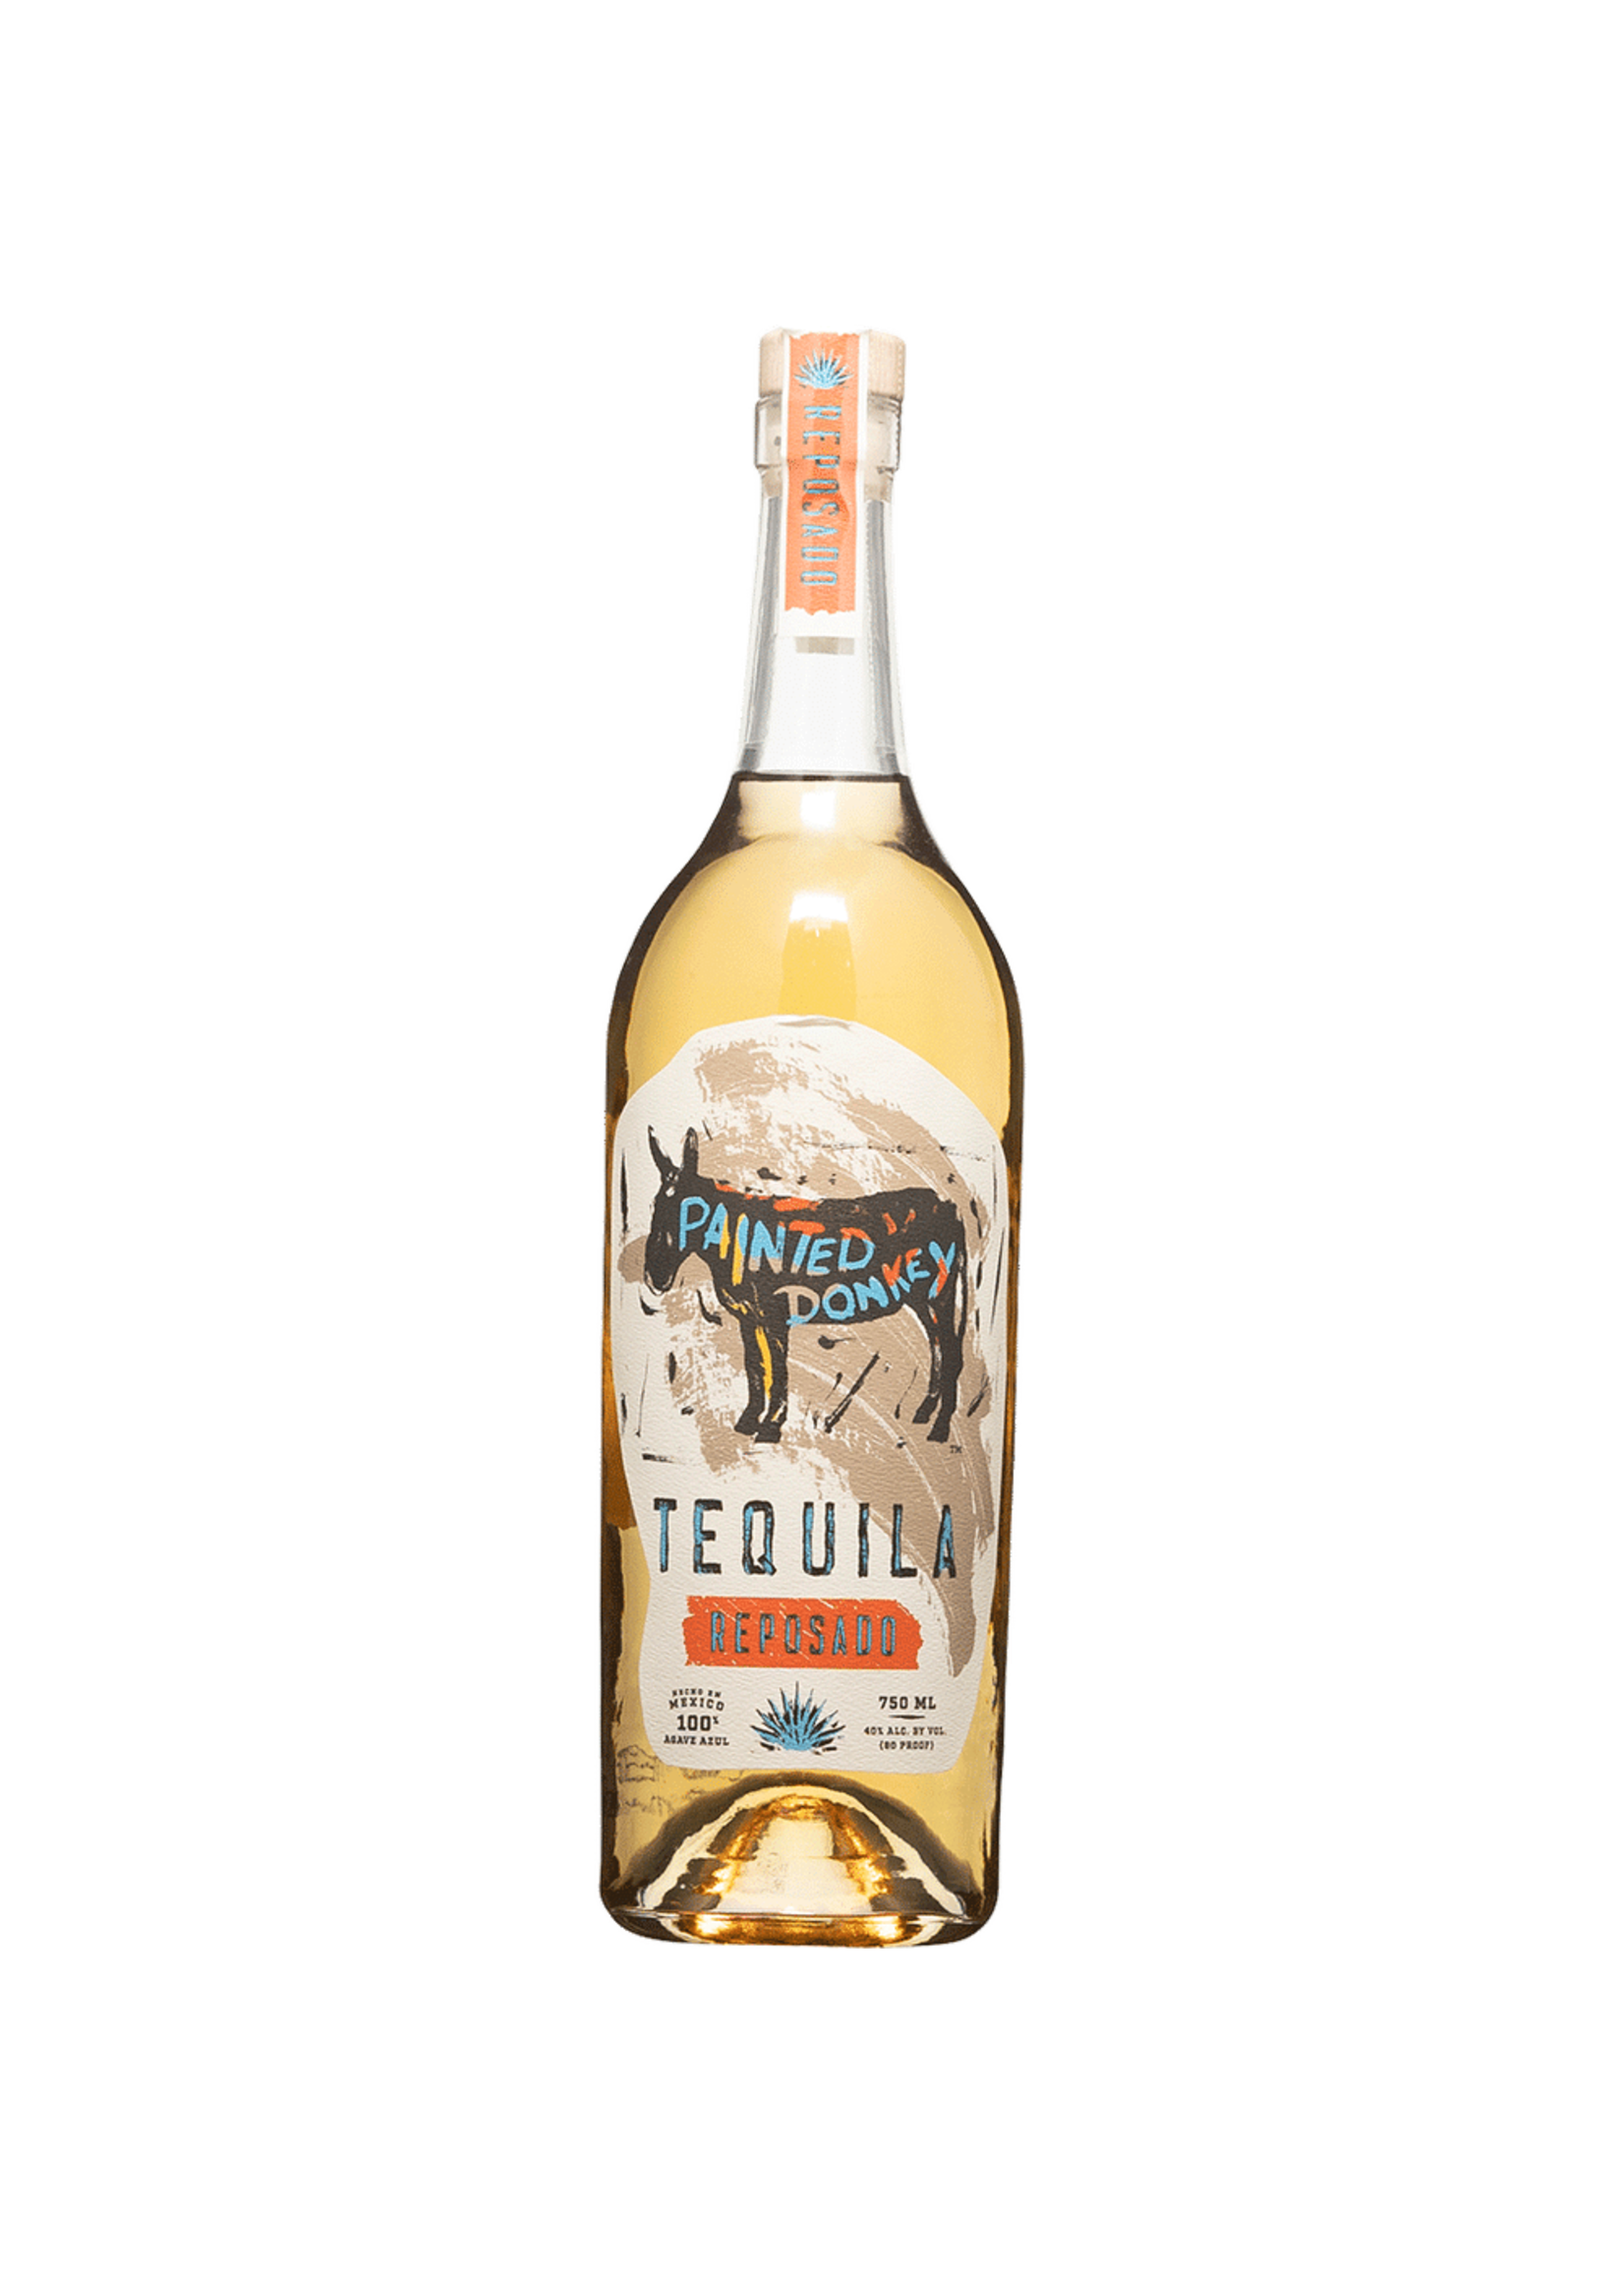 Painted Donkey Tequila Painted Donkey Reposado Tequila 80Proof 750ml